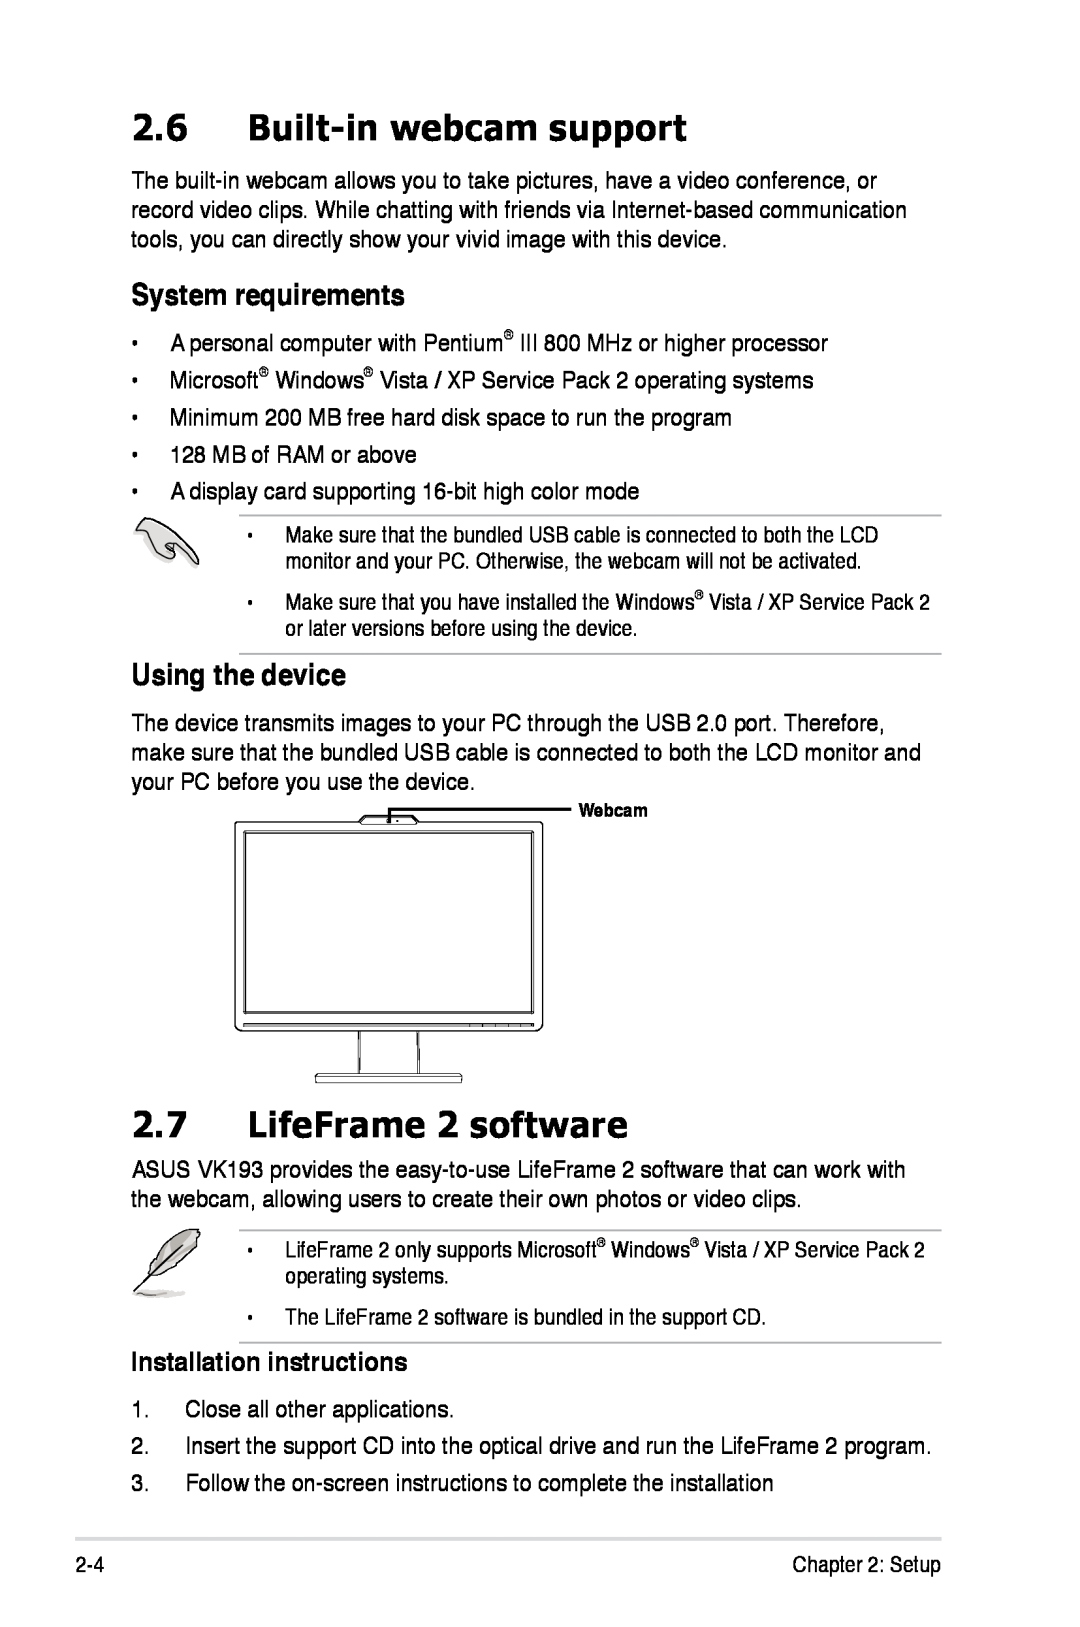 Asus VK193 Built-in webcam support, LifeFrame 2 software, System requirements, Using the device, Installation instructions 